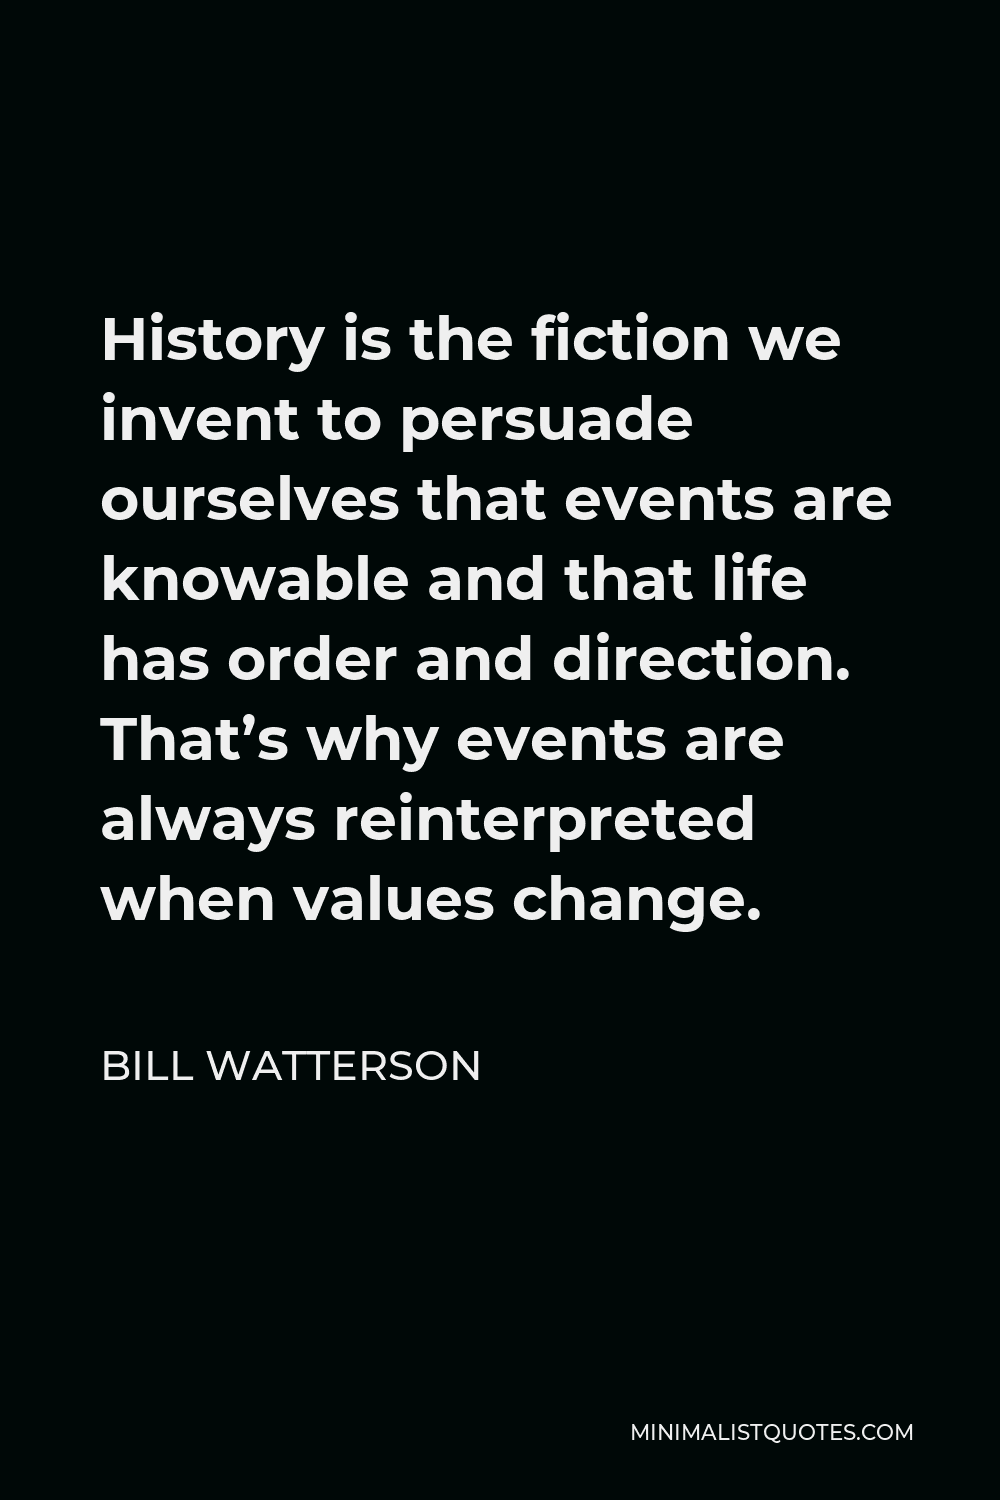 Bill Watterson Quote - History is the fiction we invent to persuade ourselves that events are knowable and that life has order and direction. That’s why events are always reinterpreted when values change.